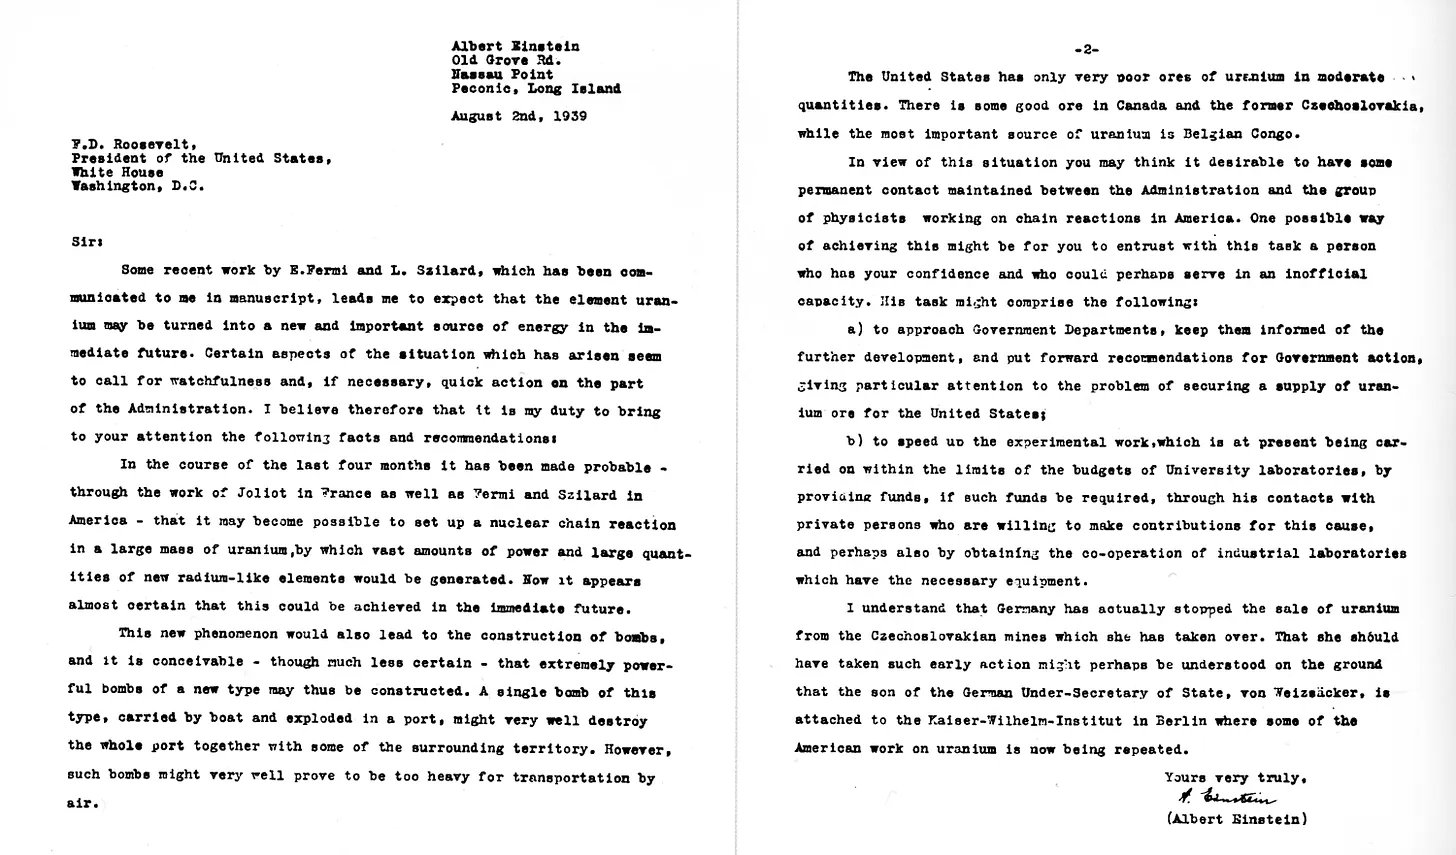 The now famous Einstein-Szilárd letter was sent to the Belgian Ambassador to the United States,